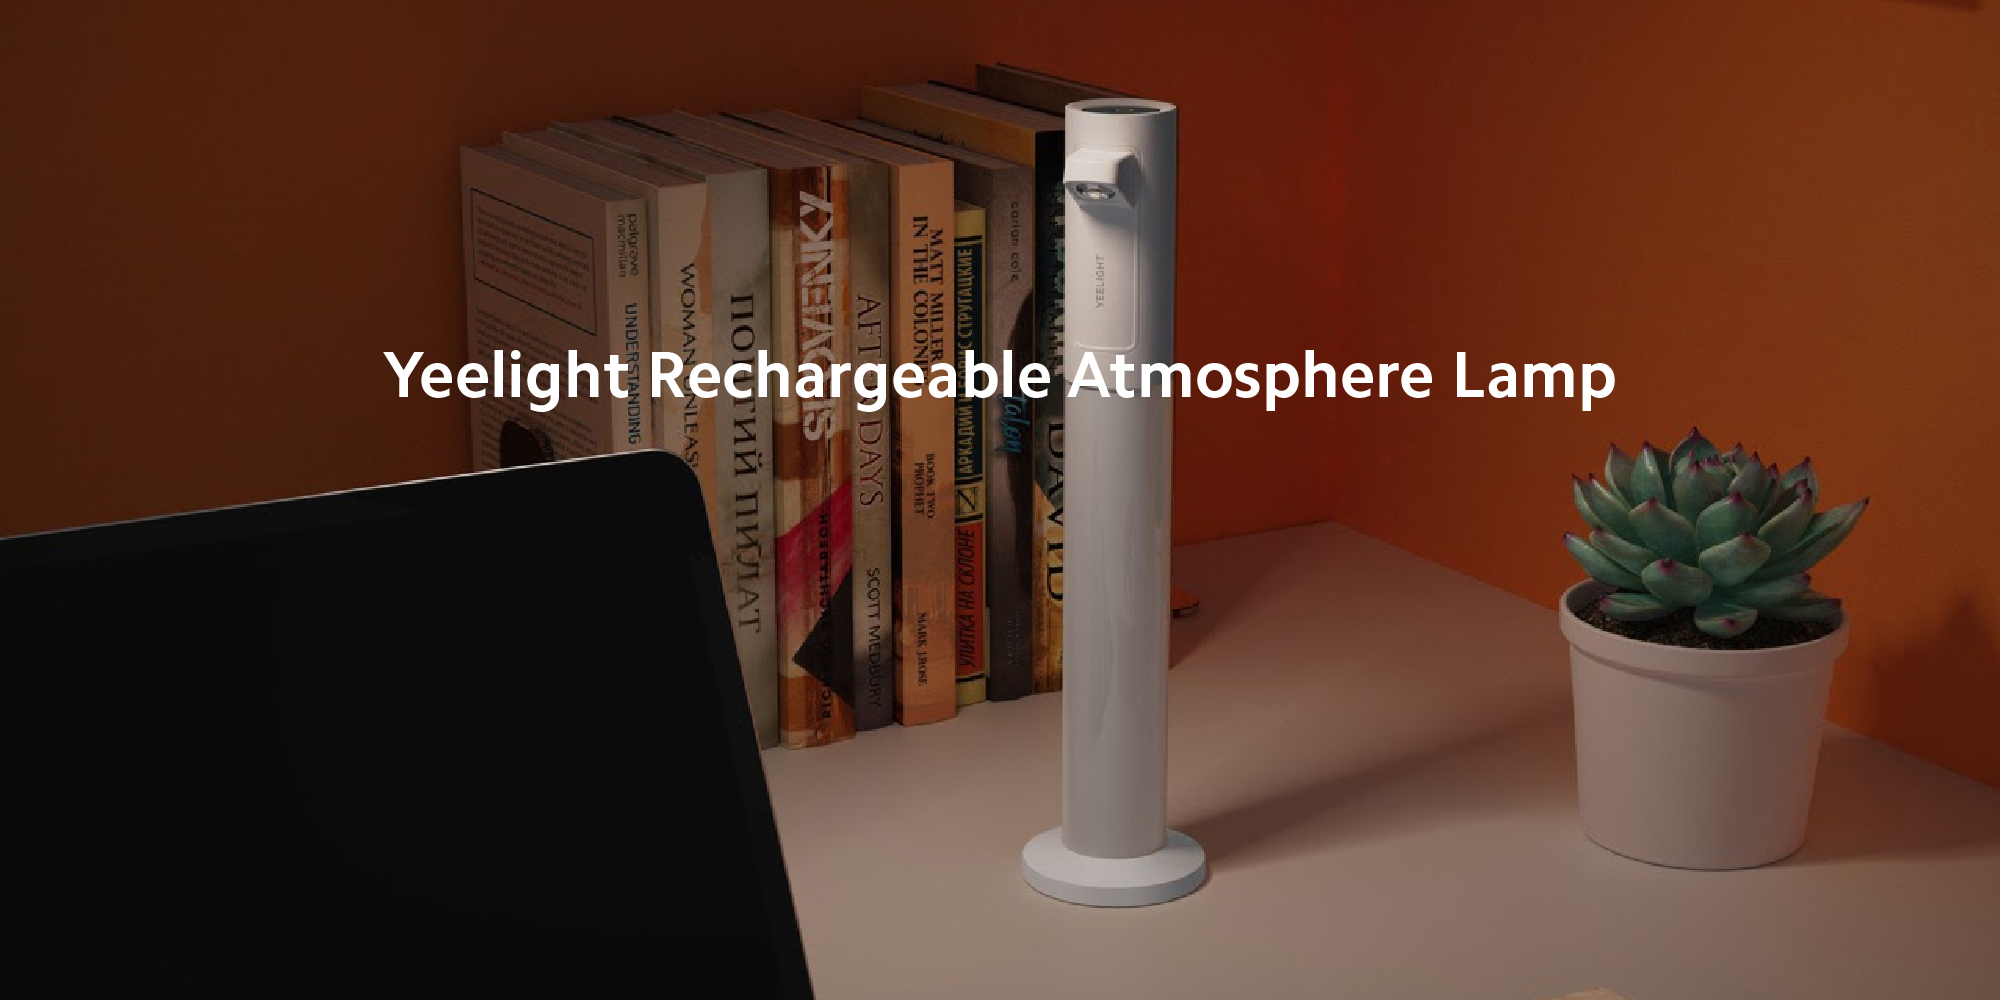 Yeelight Rechargeable Atmosphere Lamp: Portable, Dimmable, and Color Changing LED Desk Lamp for Reading, Studying, or Relaxing